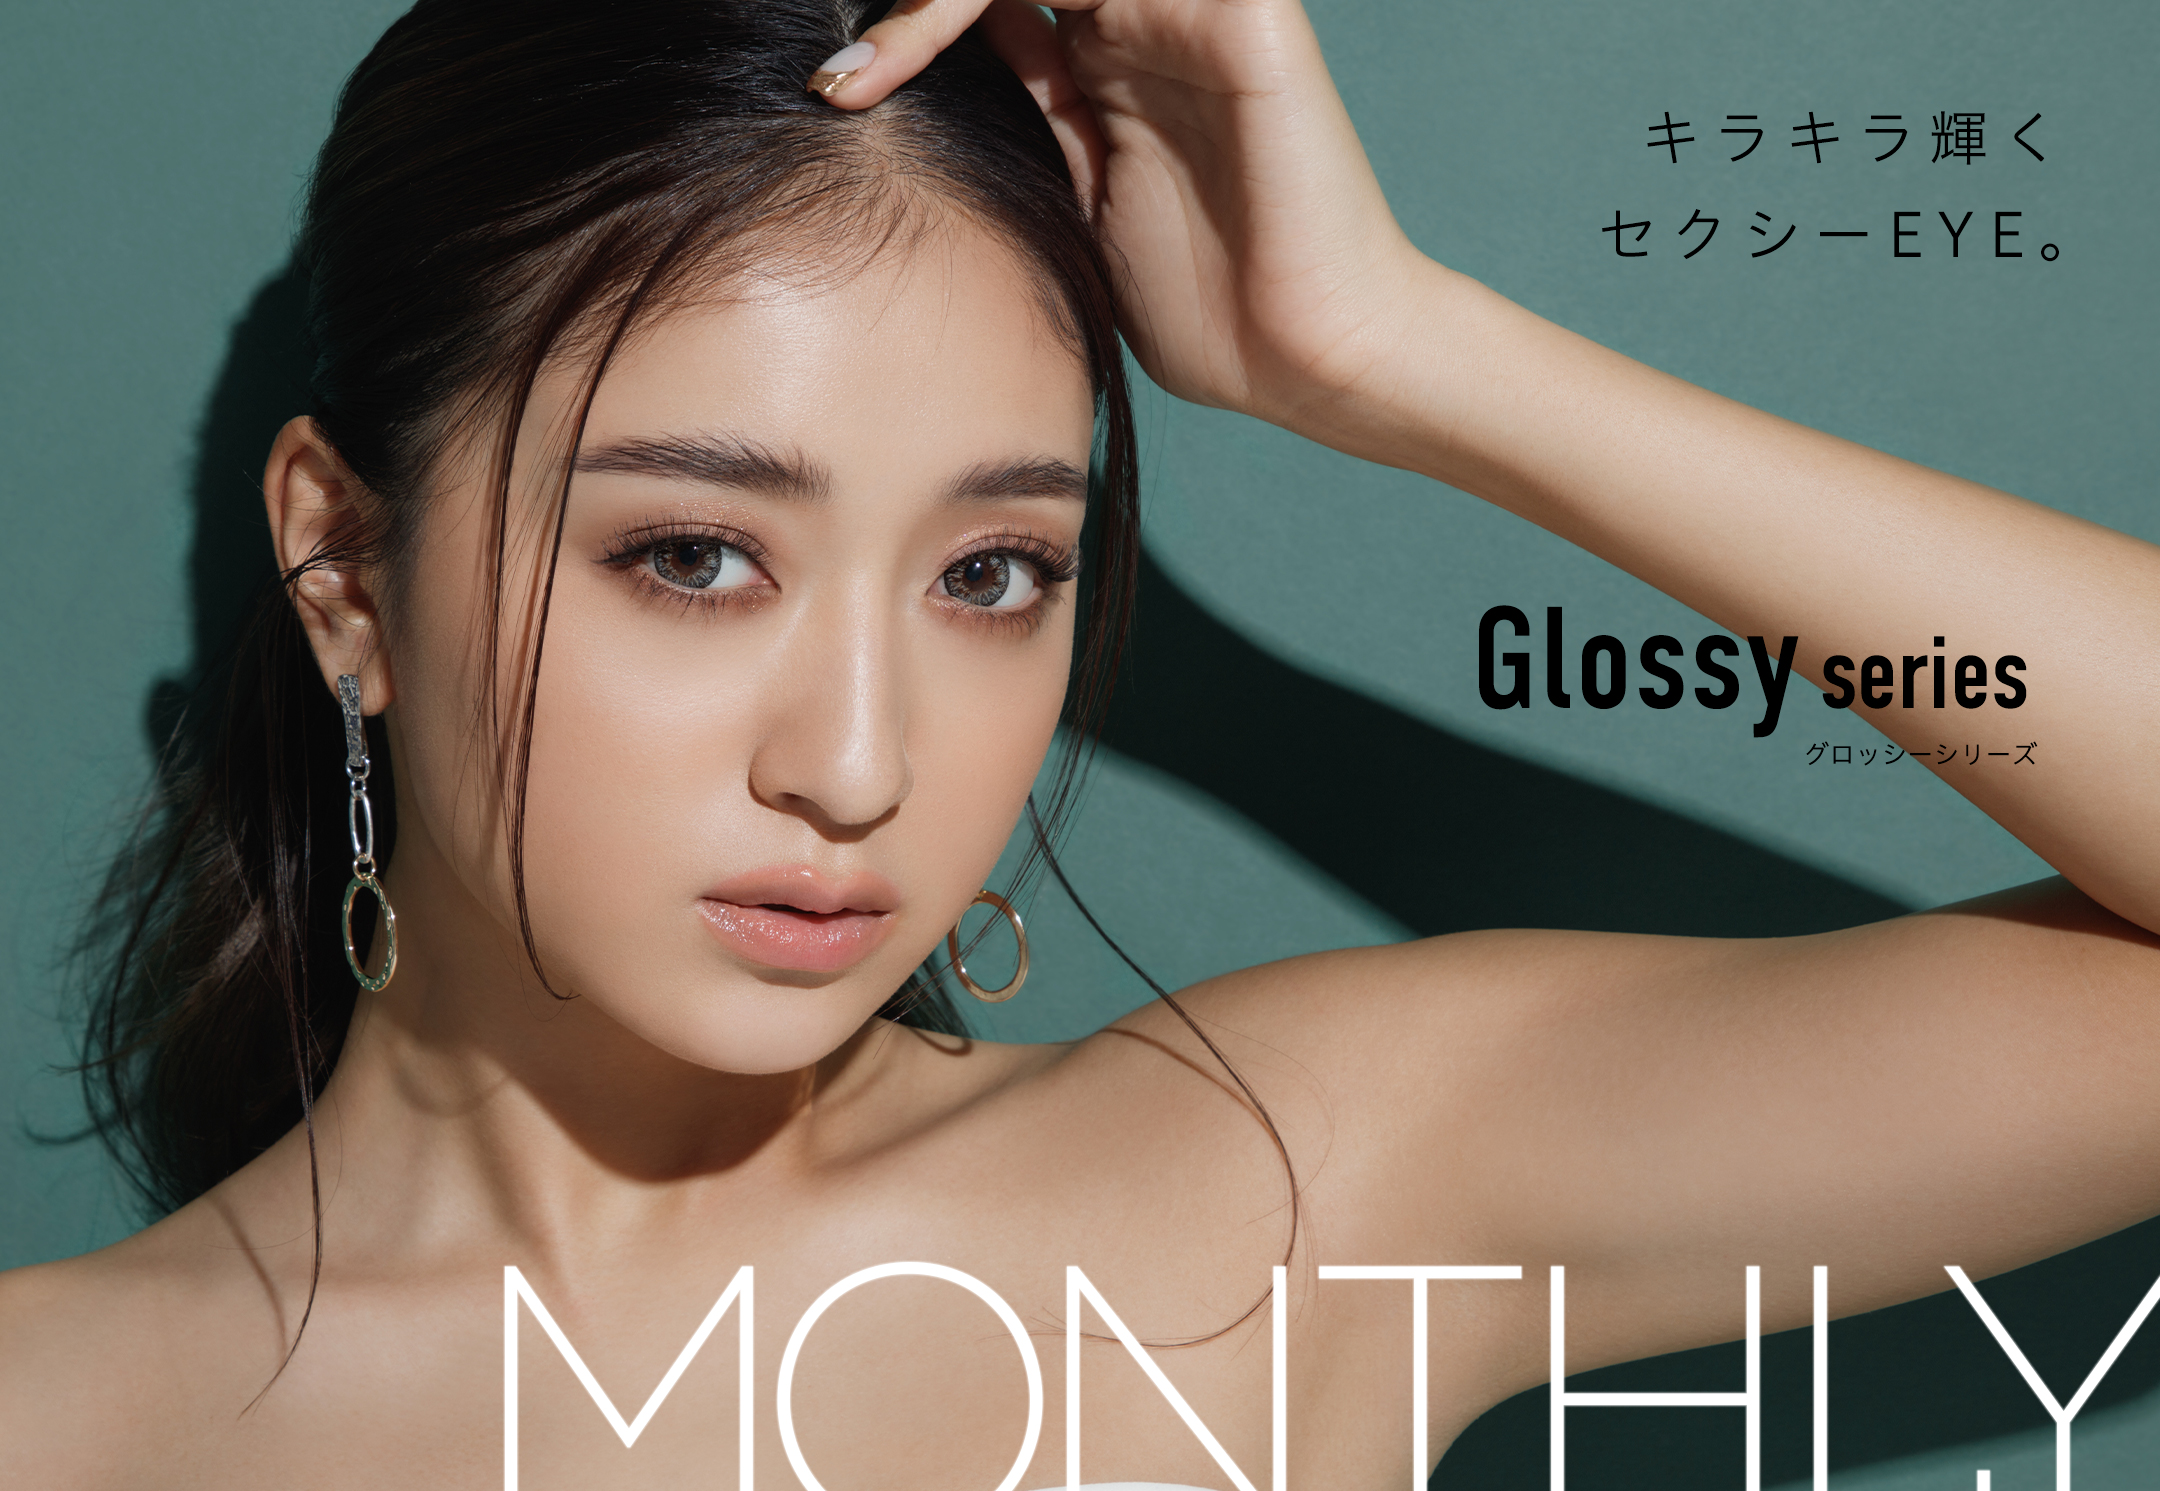 1month glossy series